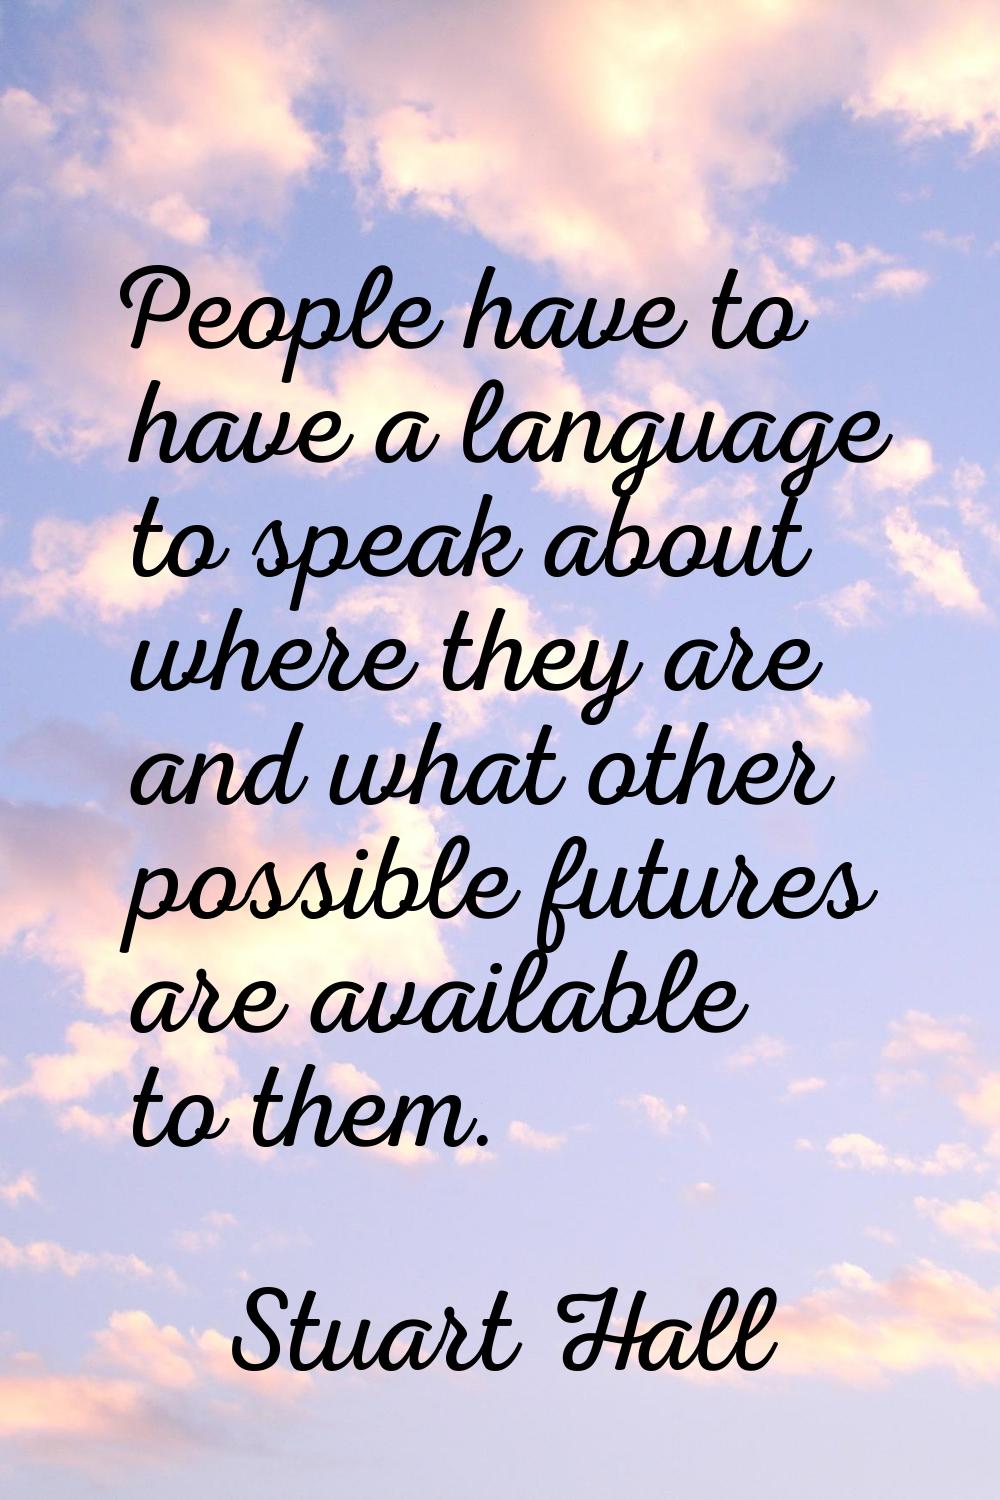 People have to have a language to speak about where they are and what other possible futures are av